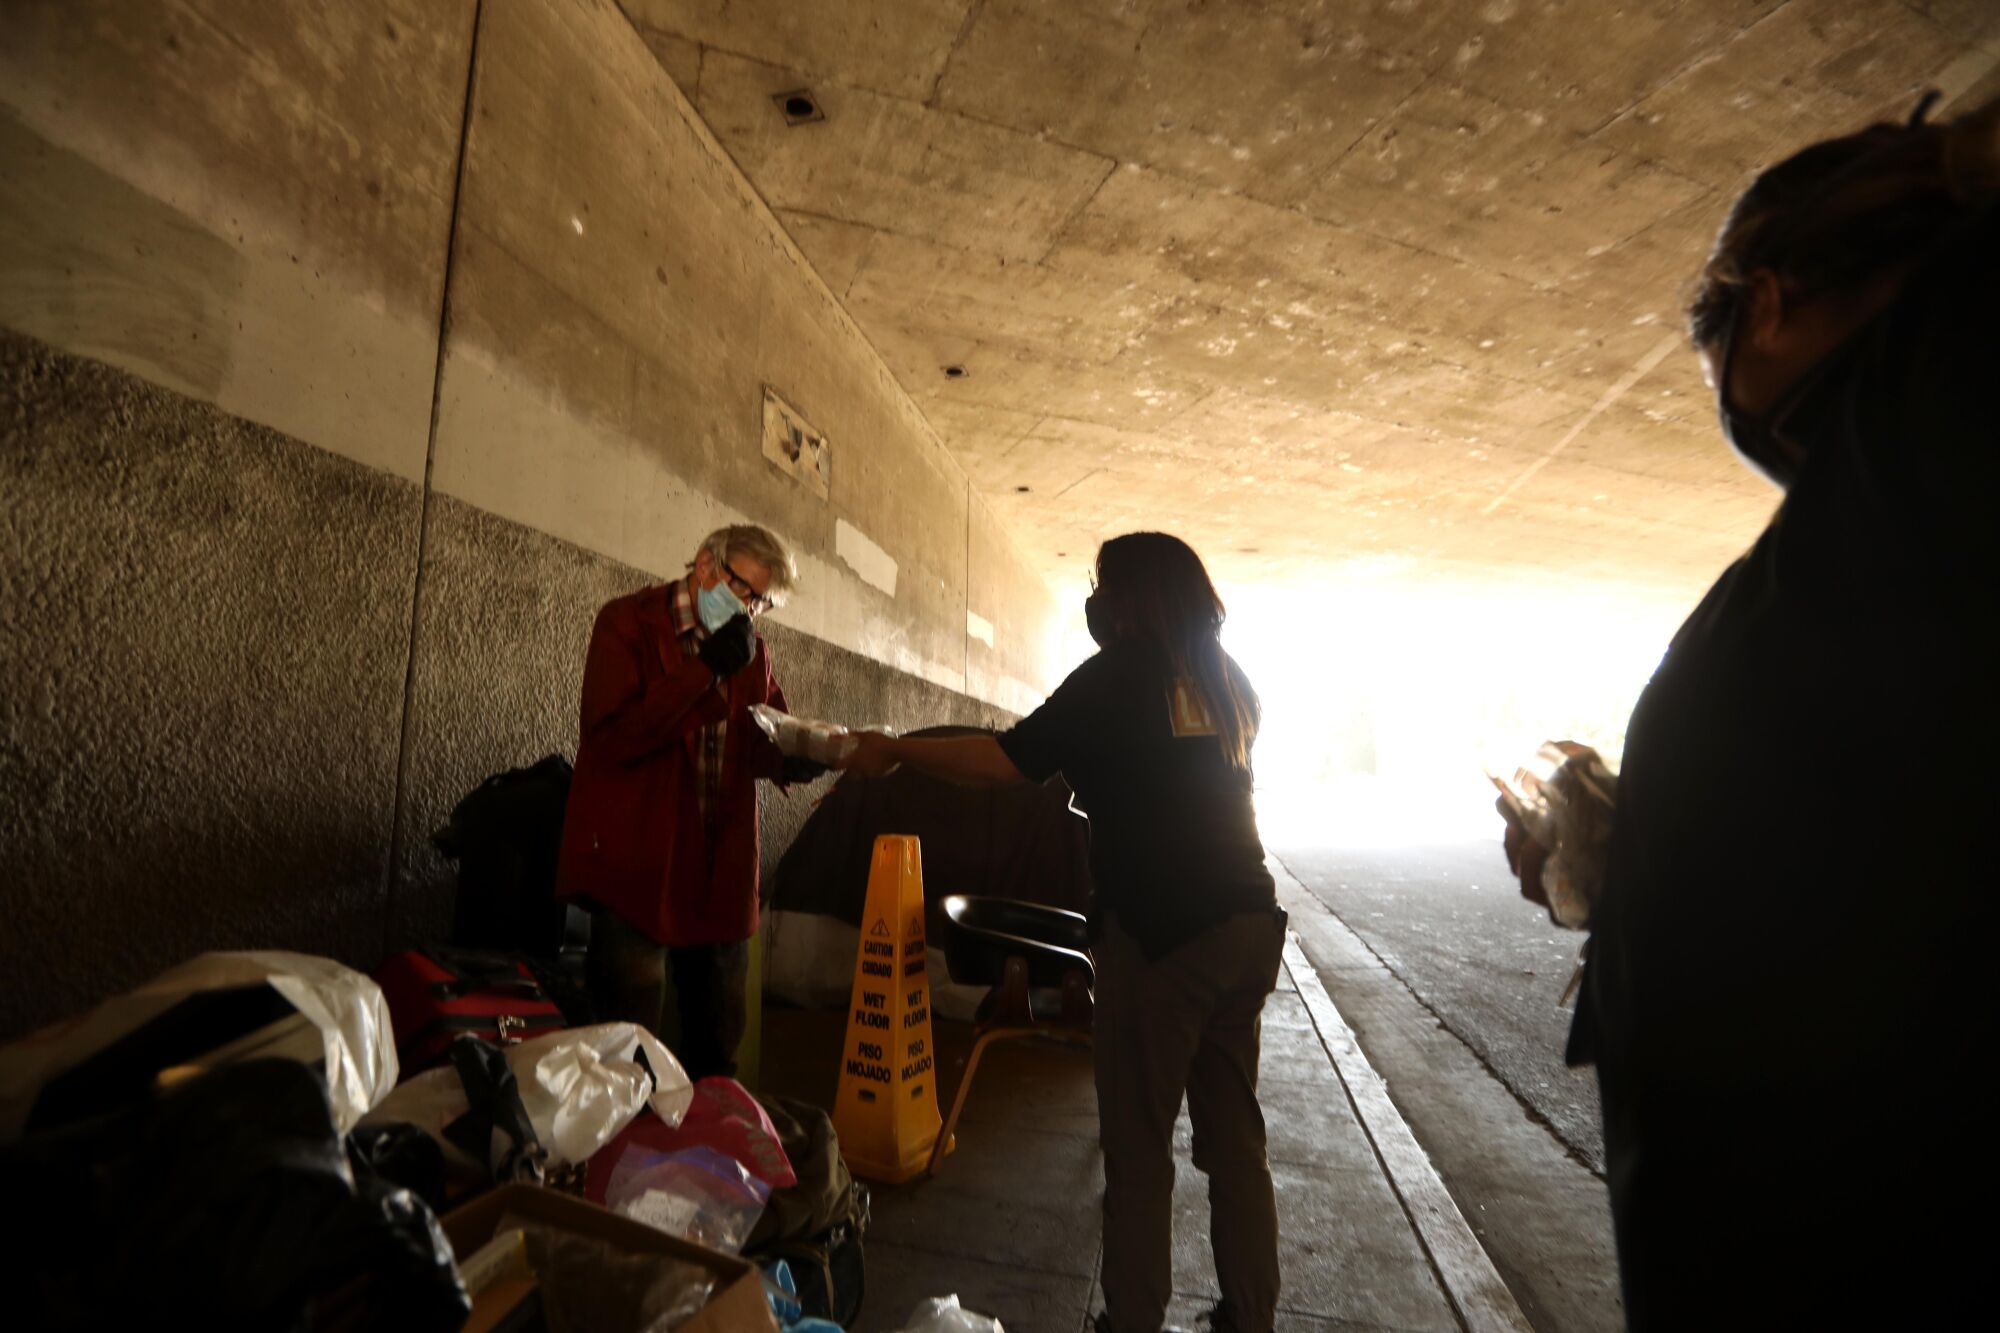 Outreach worker Judith Nuffio, center, gives Michael Cooper food while visiting his encampment under the 134 Freeway.